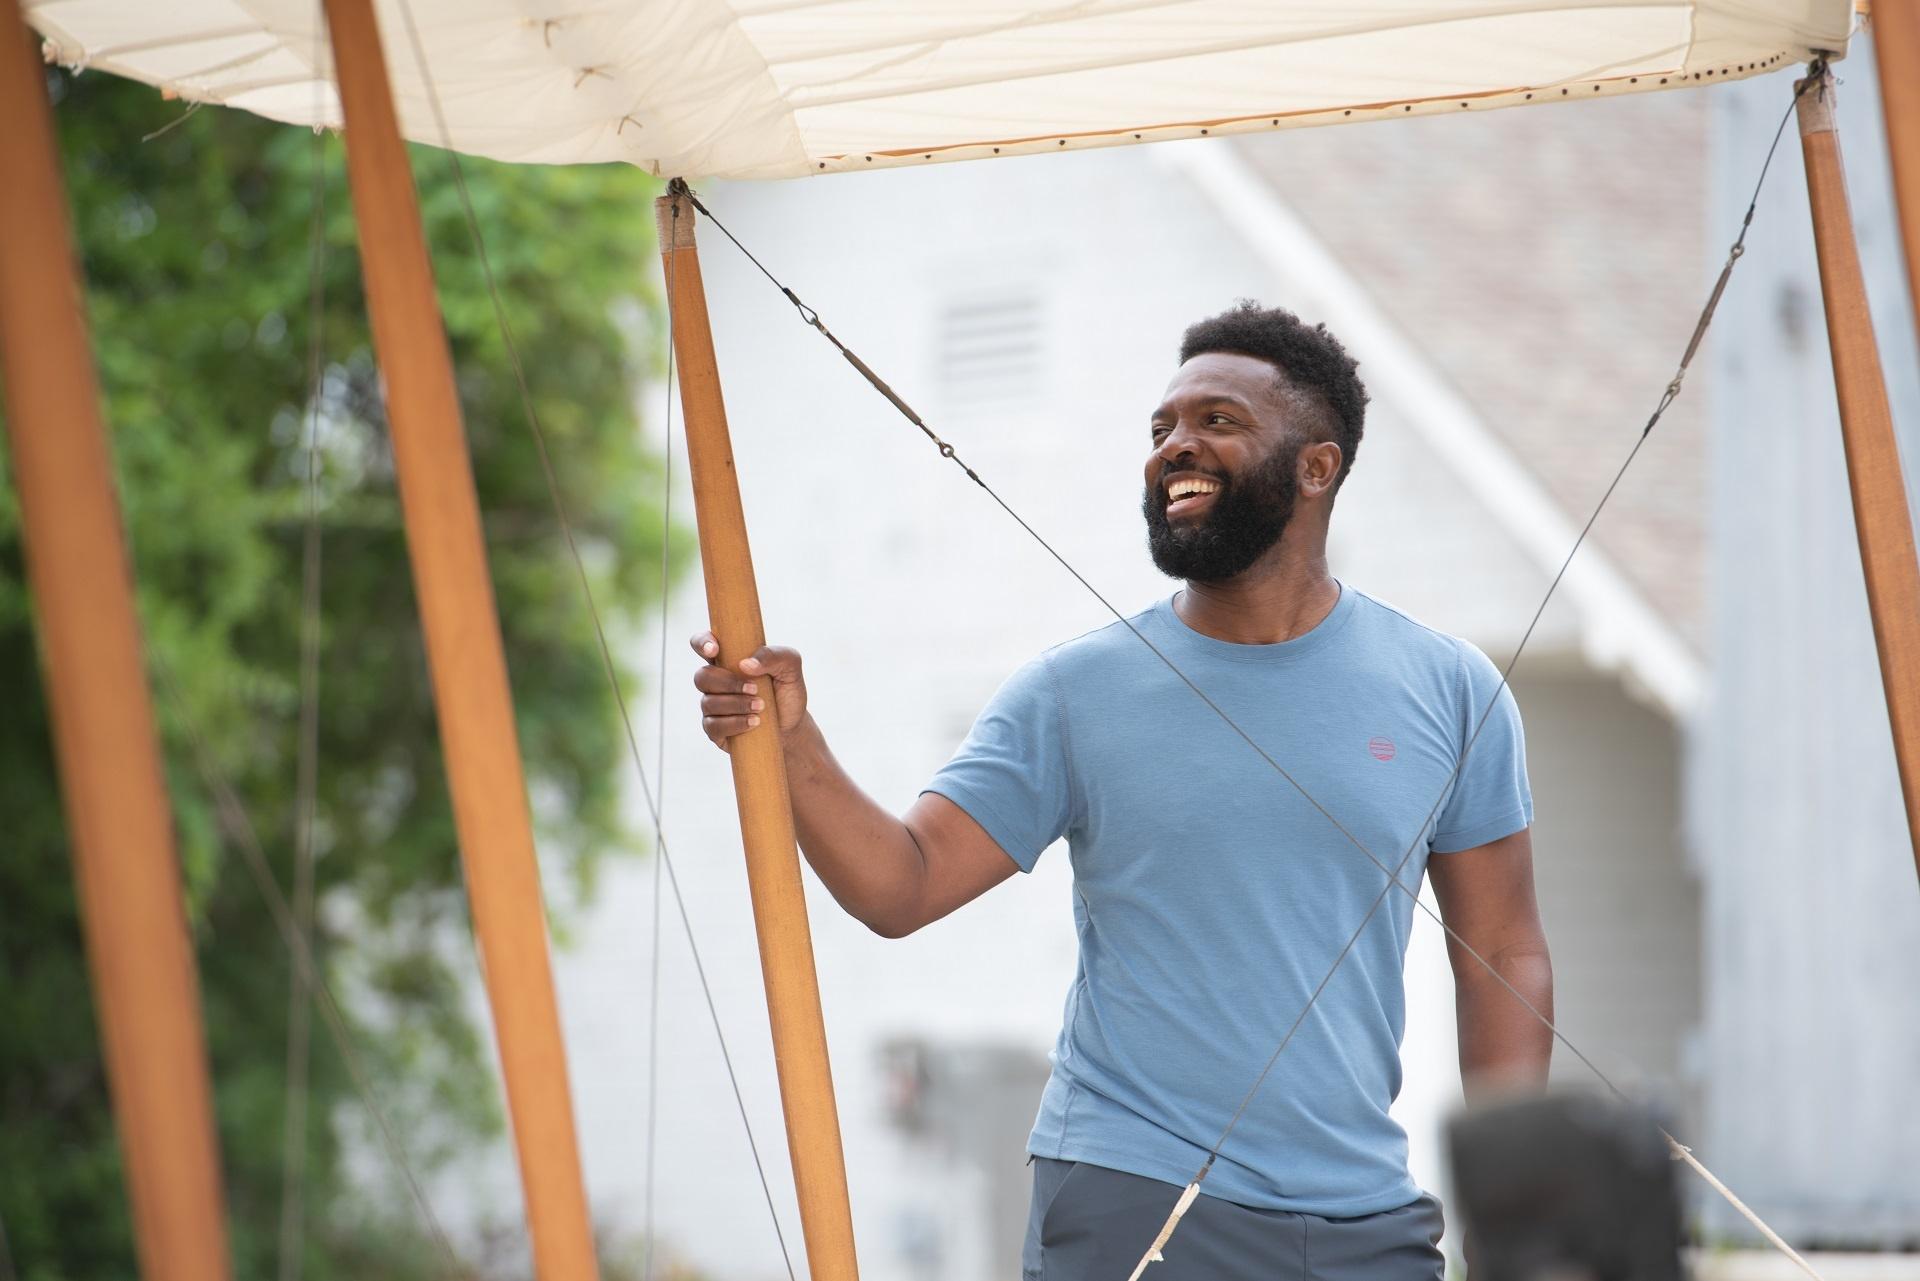 Baratunde Thurston gets ready to fly a replica of a Wright brothers plane in North Carolina